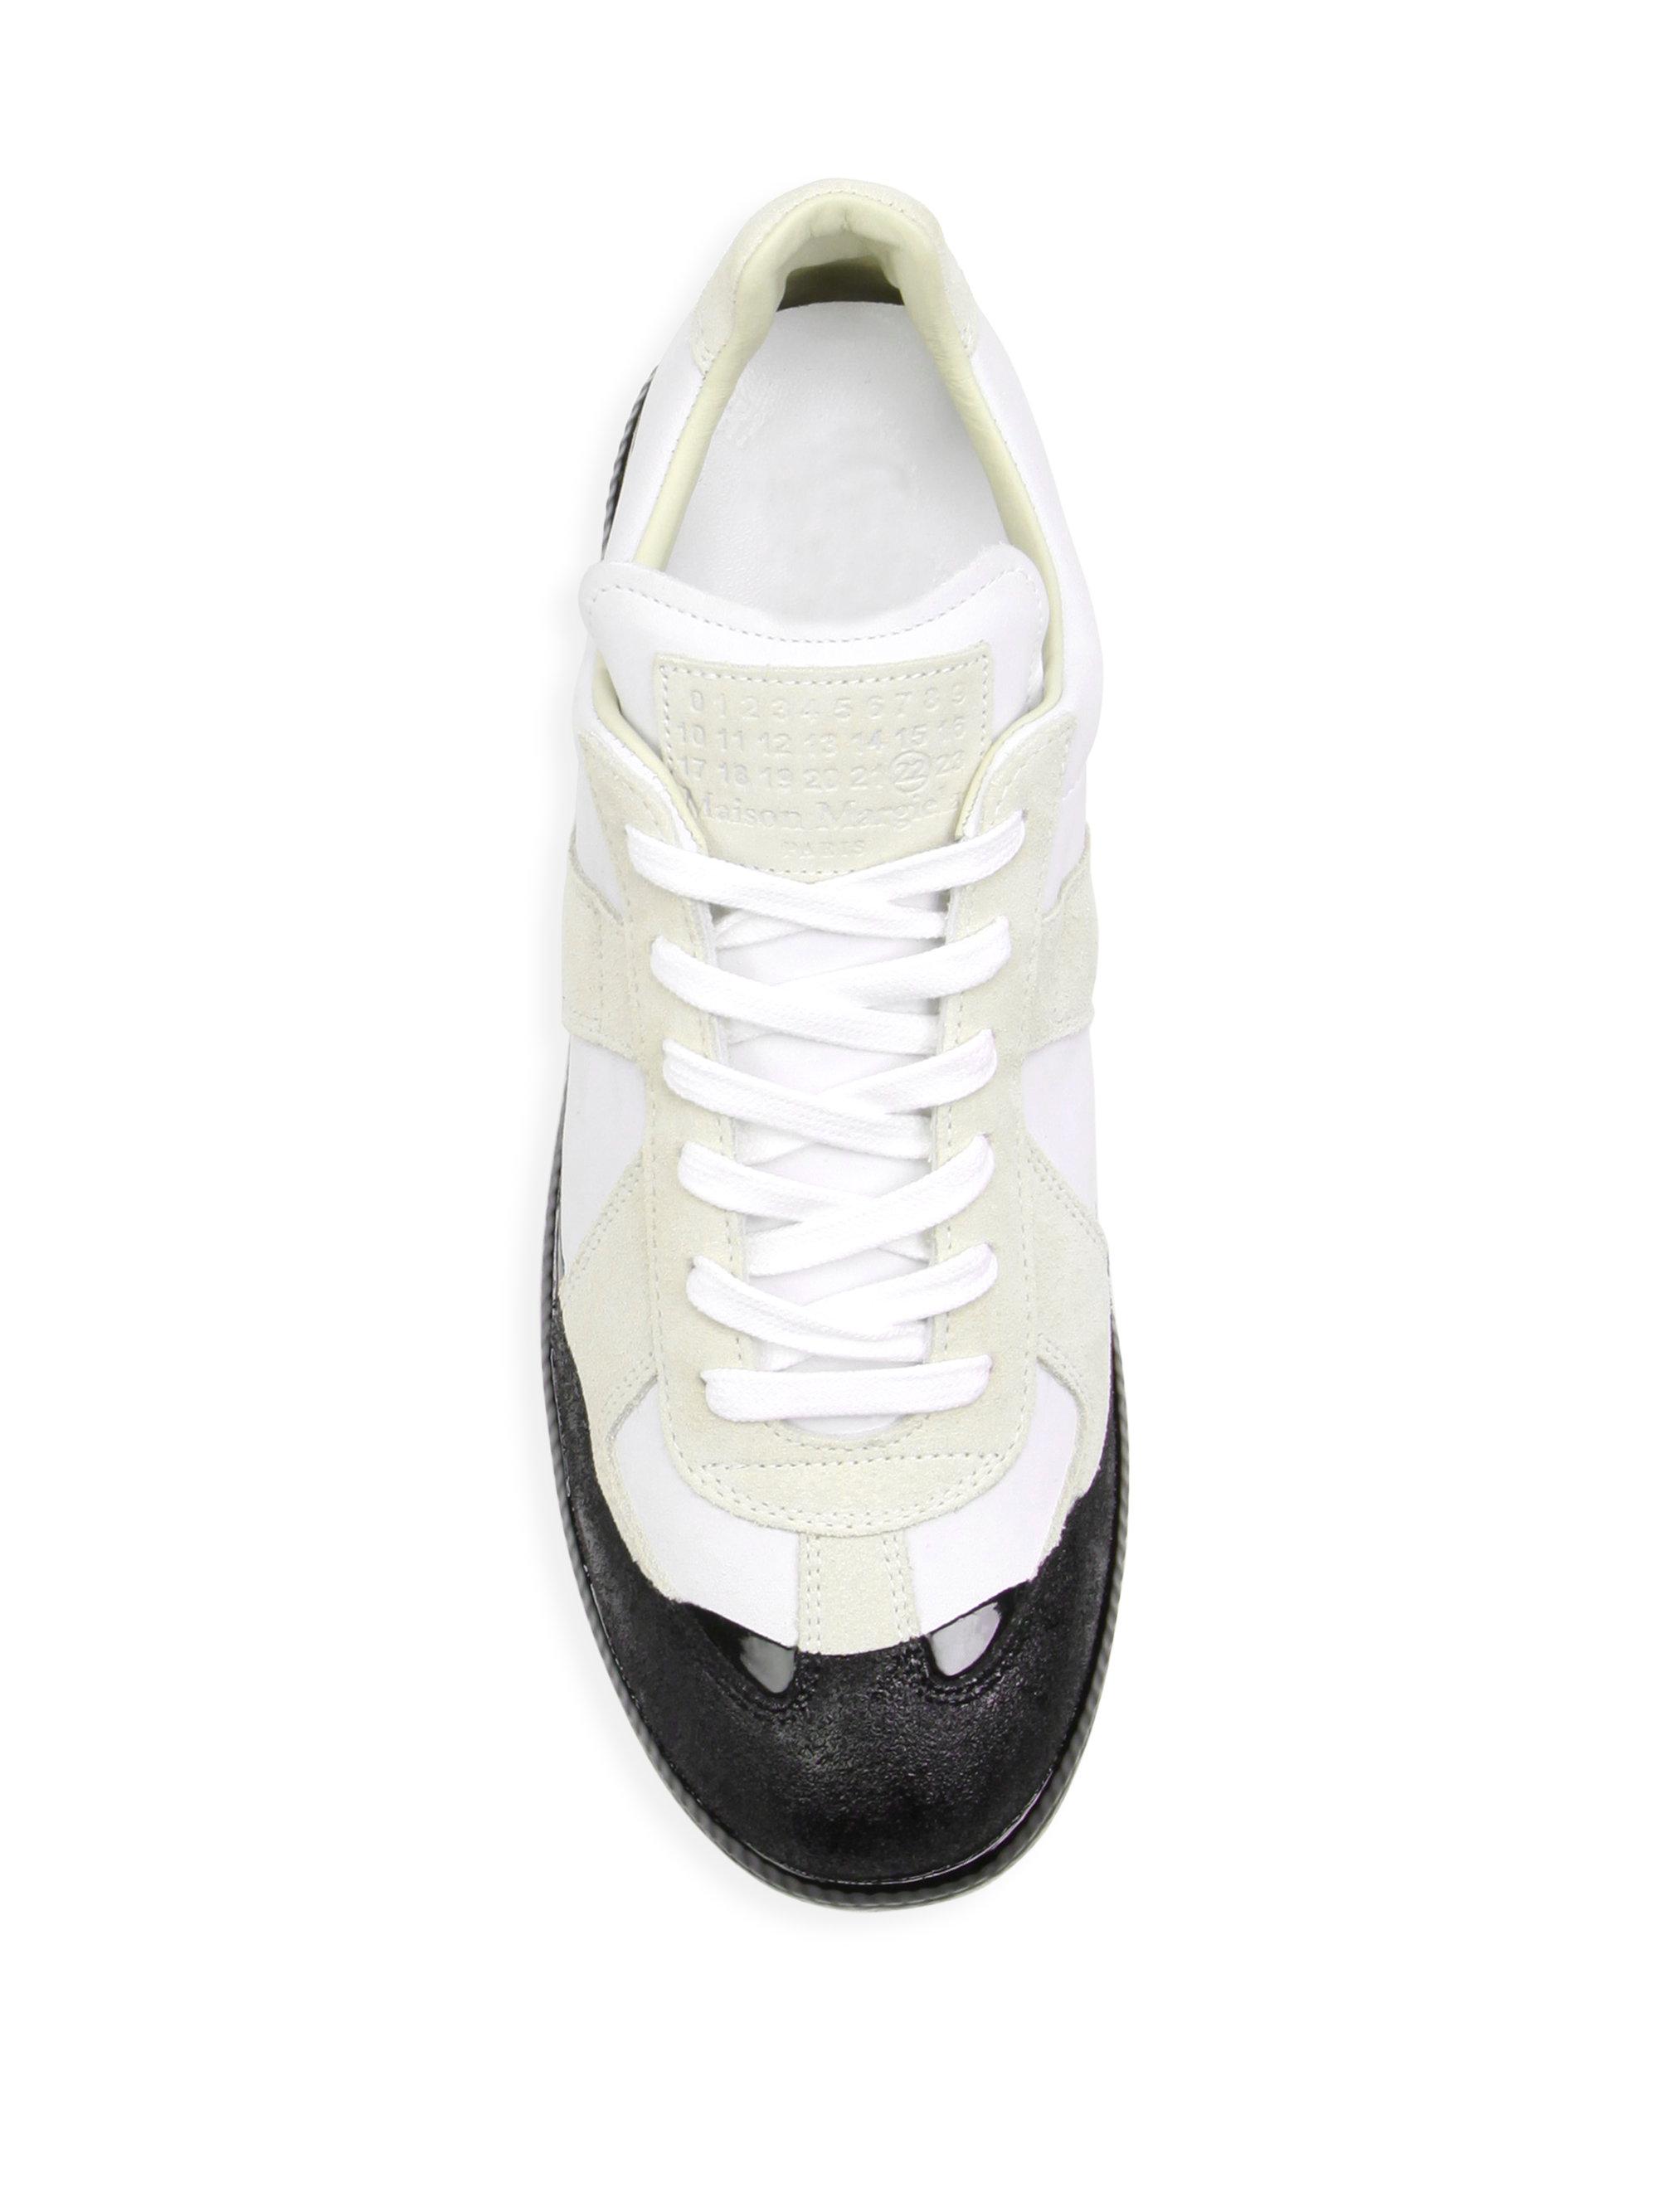 Maison Margiela Replica Dipped Low-top Leather Sneakers in White for ...